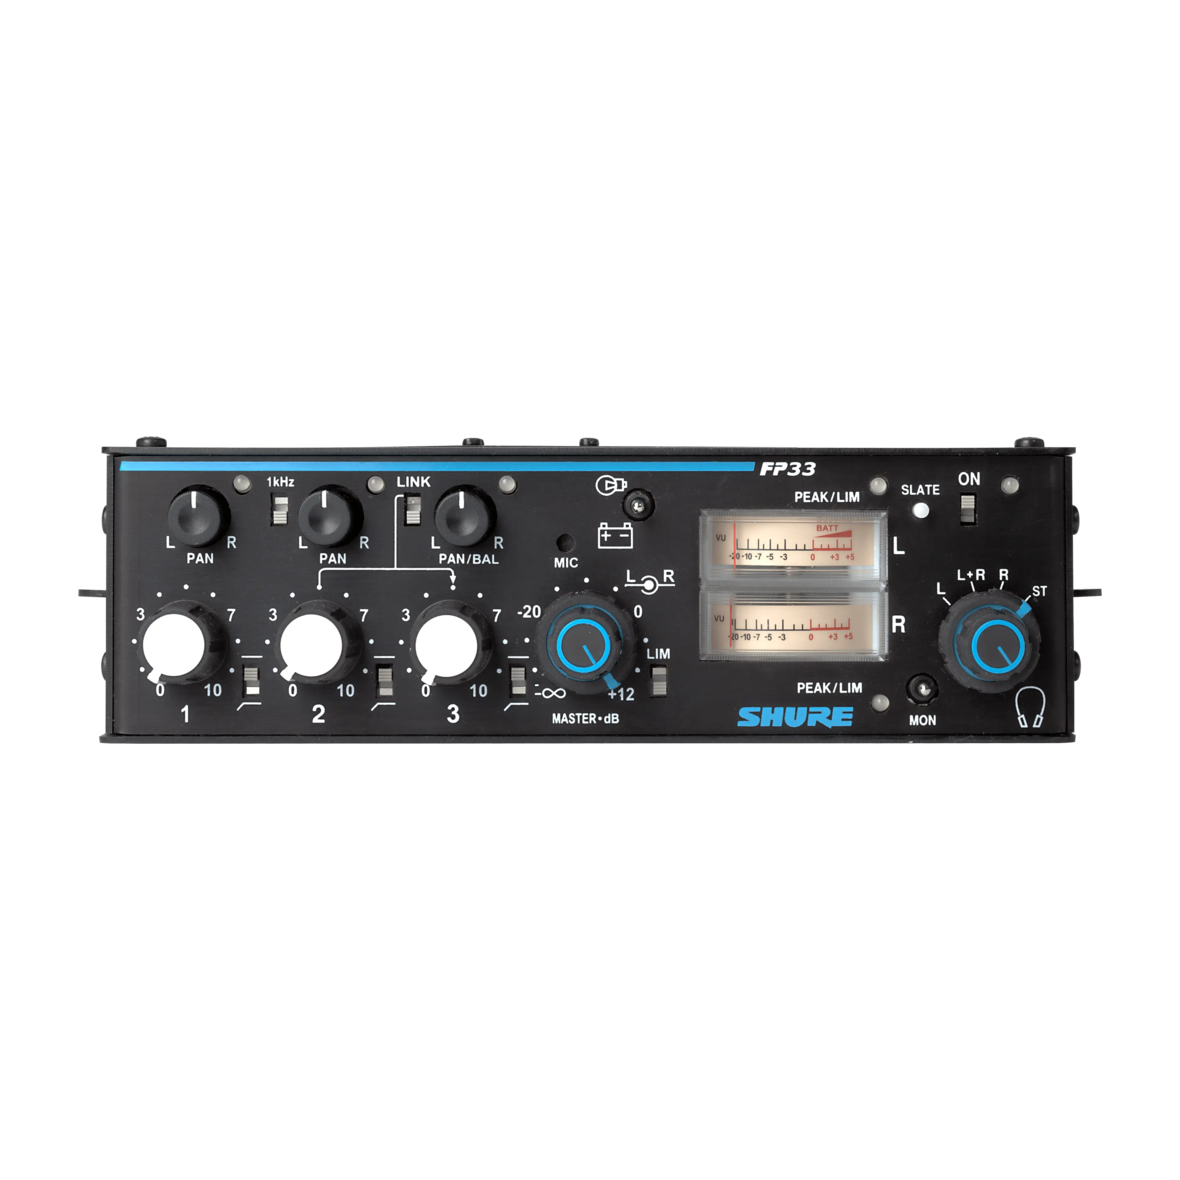 FP33 - FP33 Stereo ENG Mixer - Shure Middle East and Africa